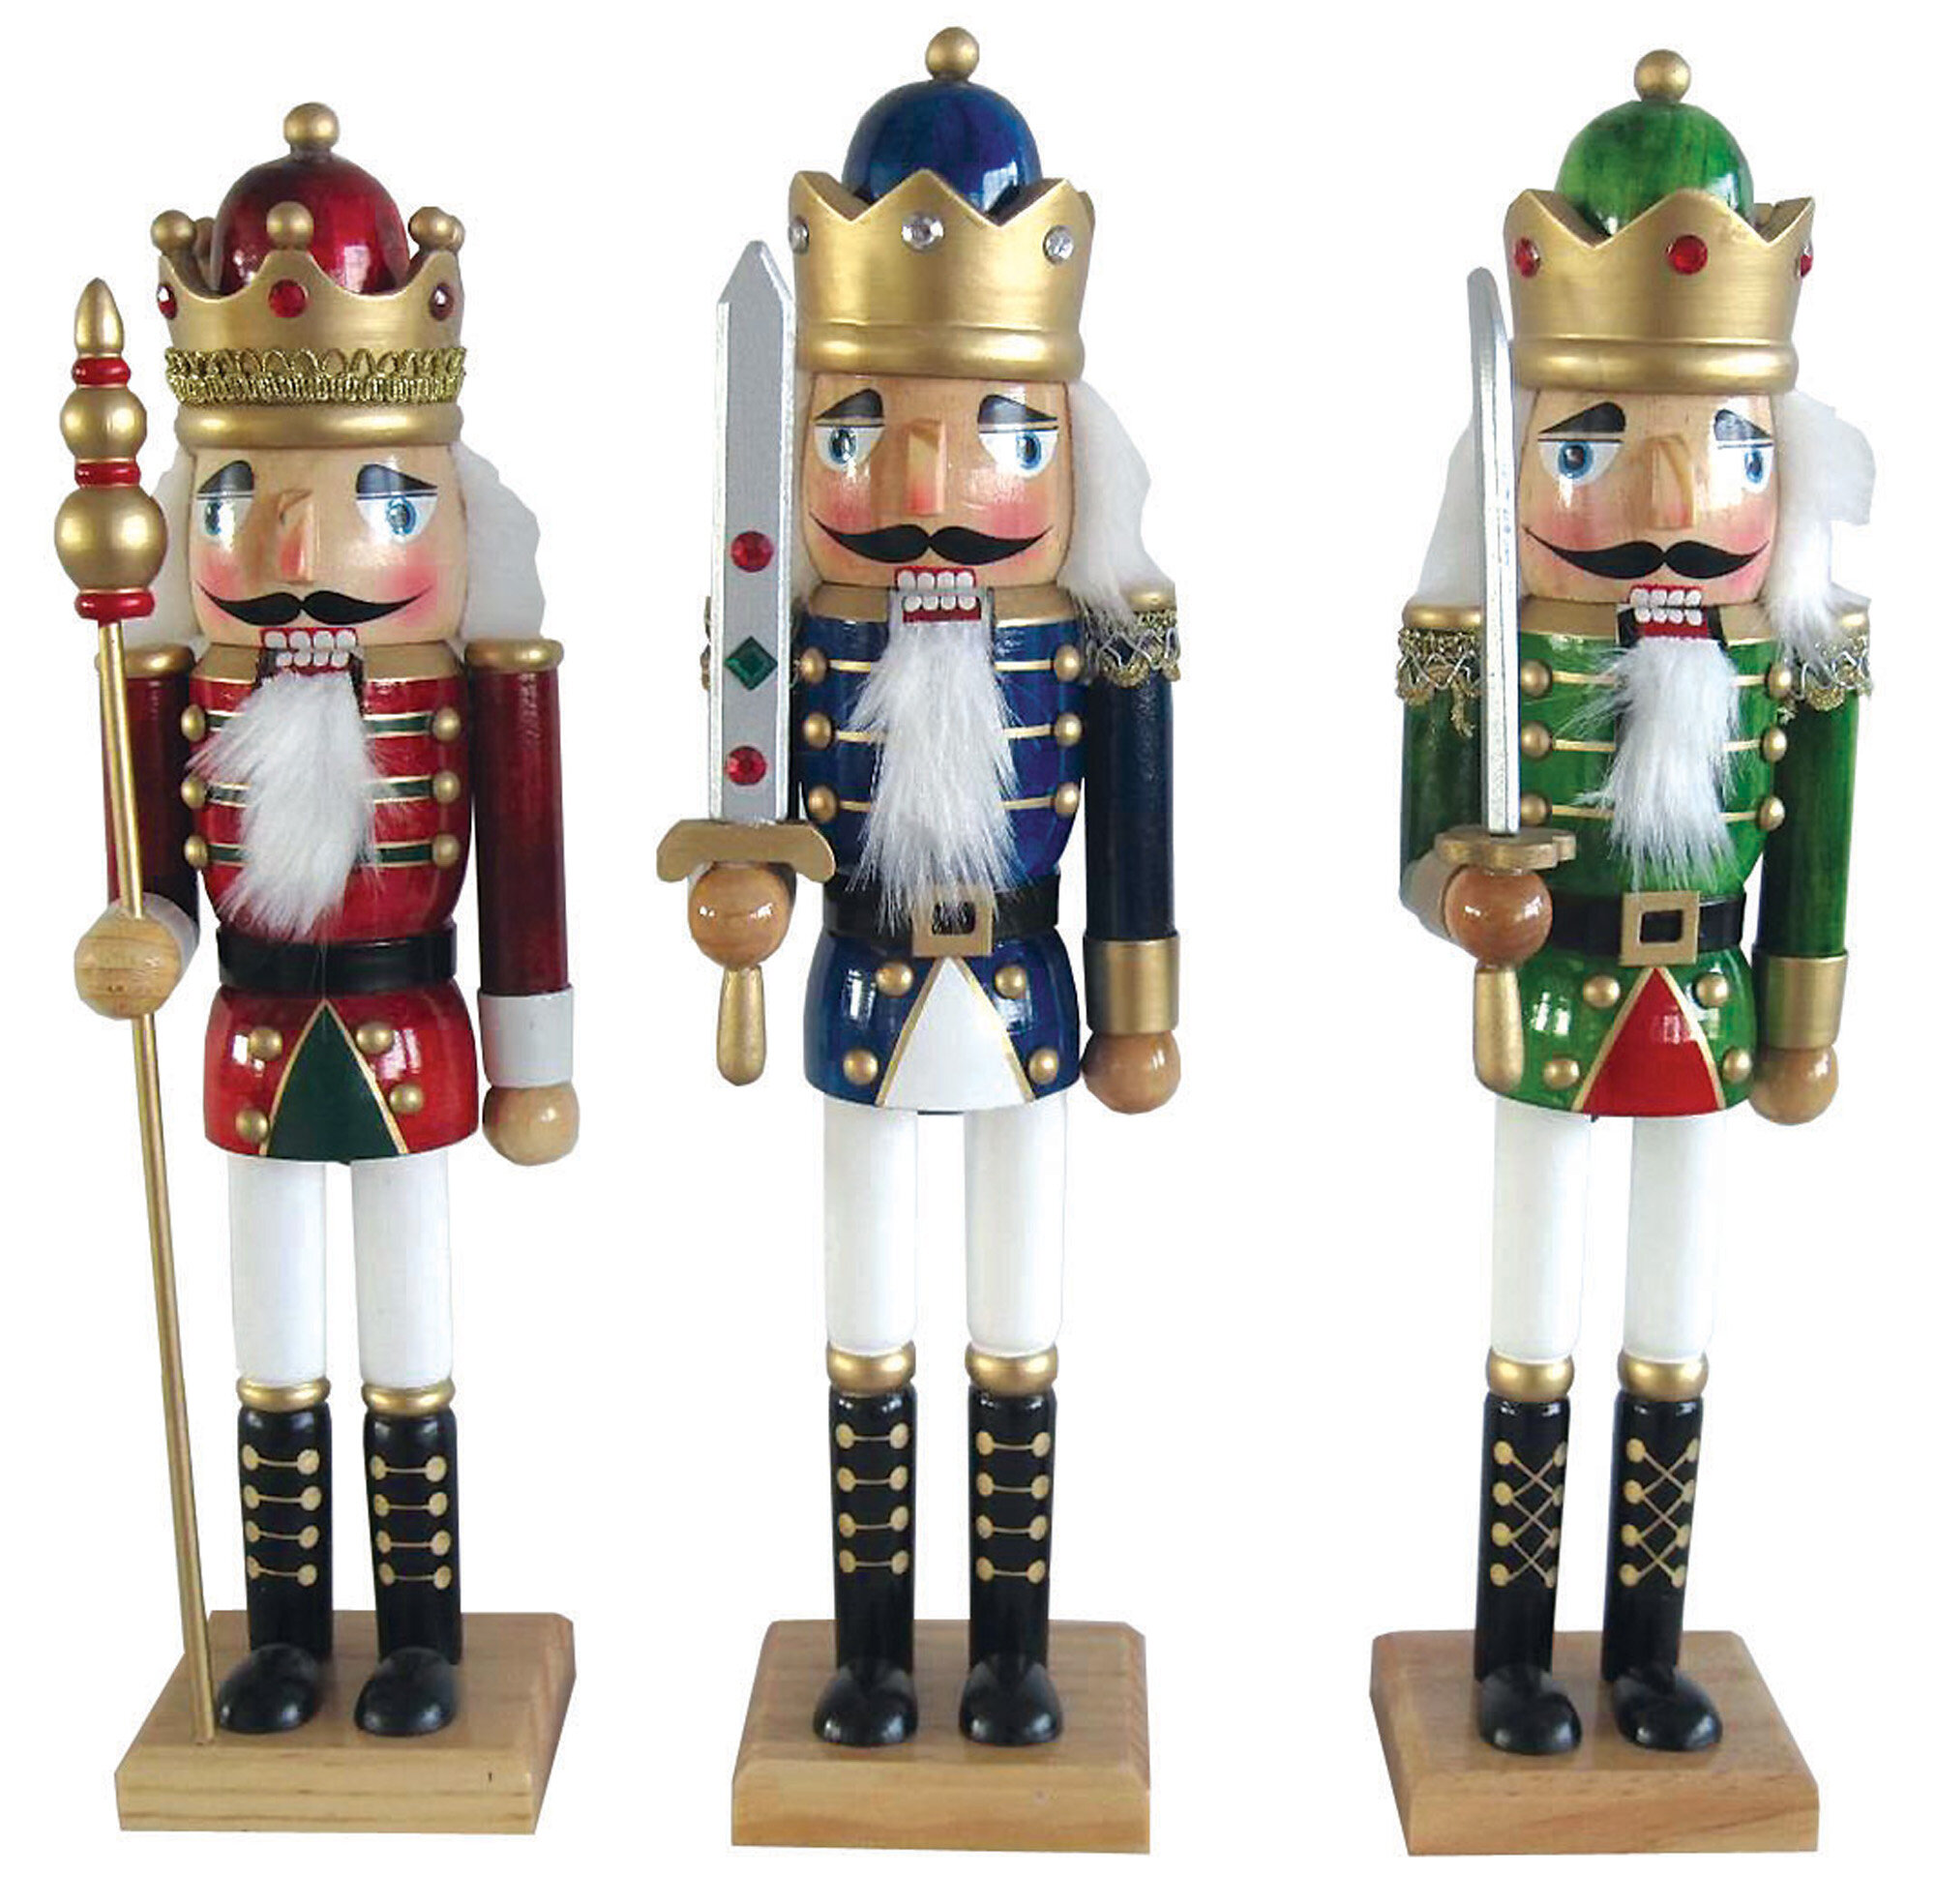 where can you buy nutcrackers